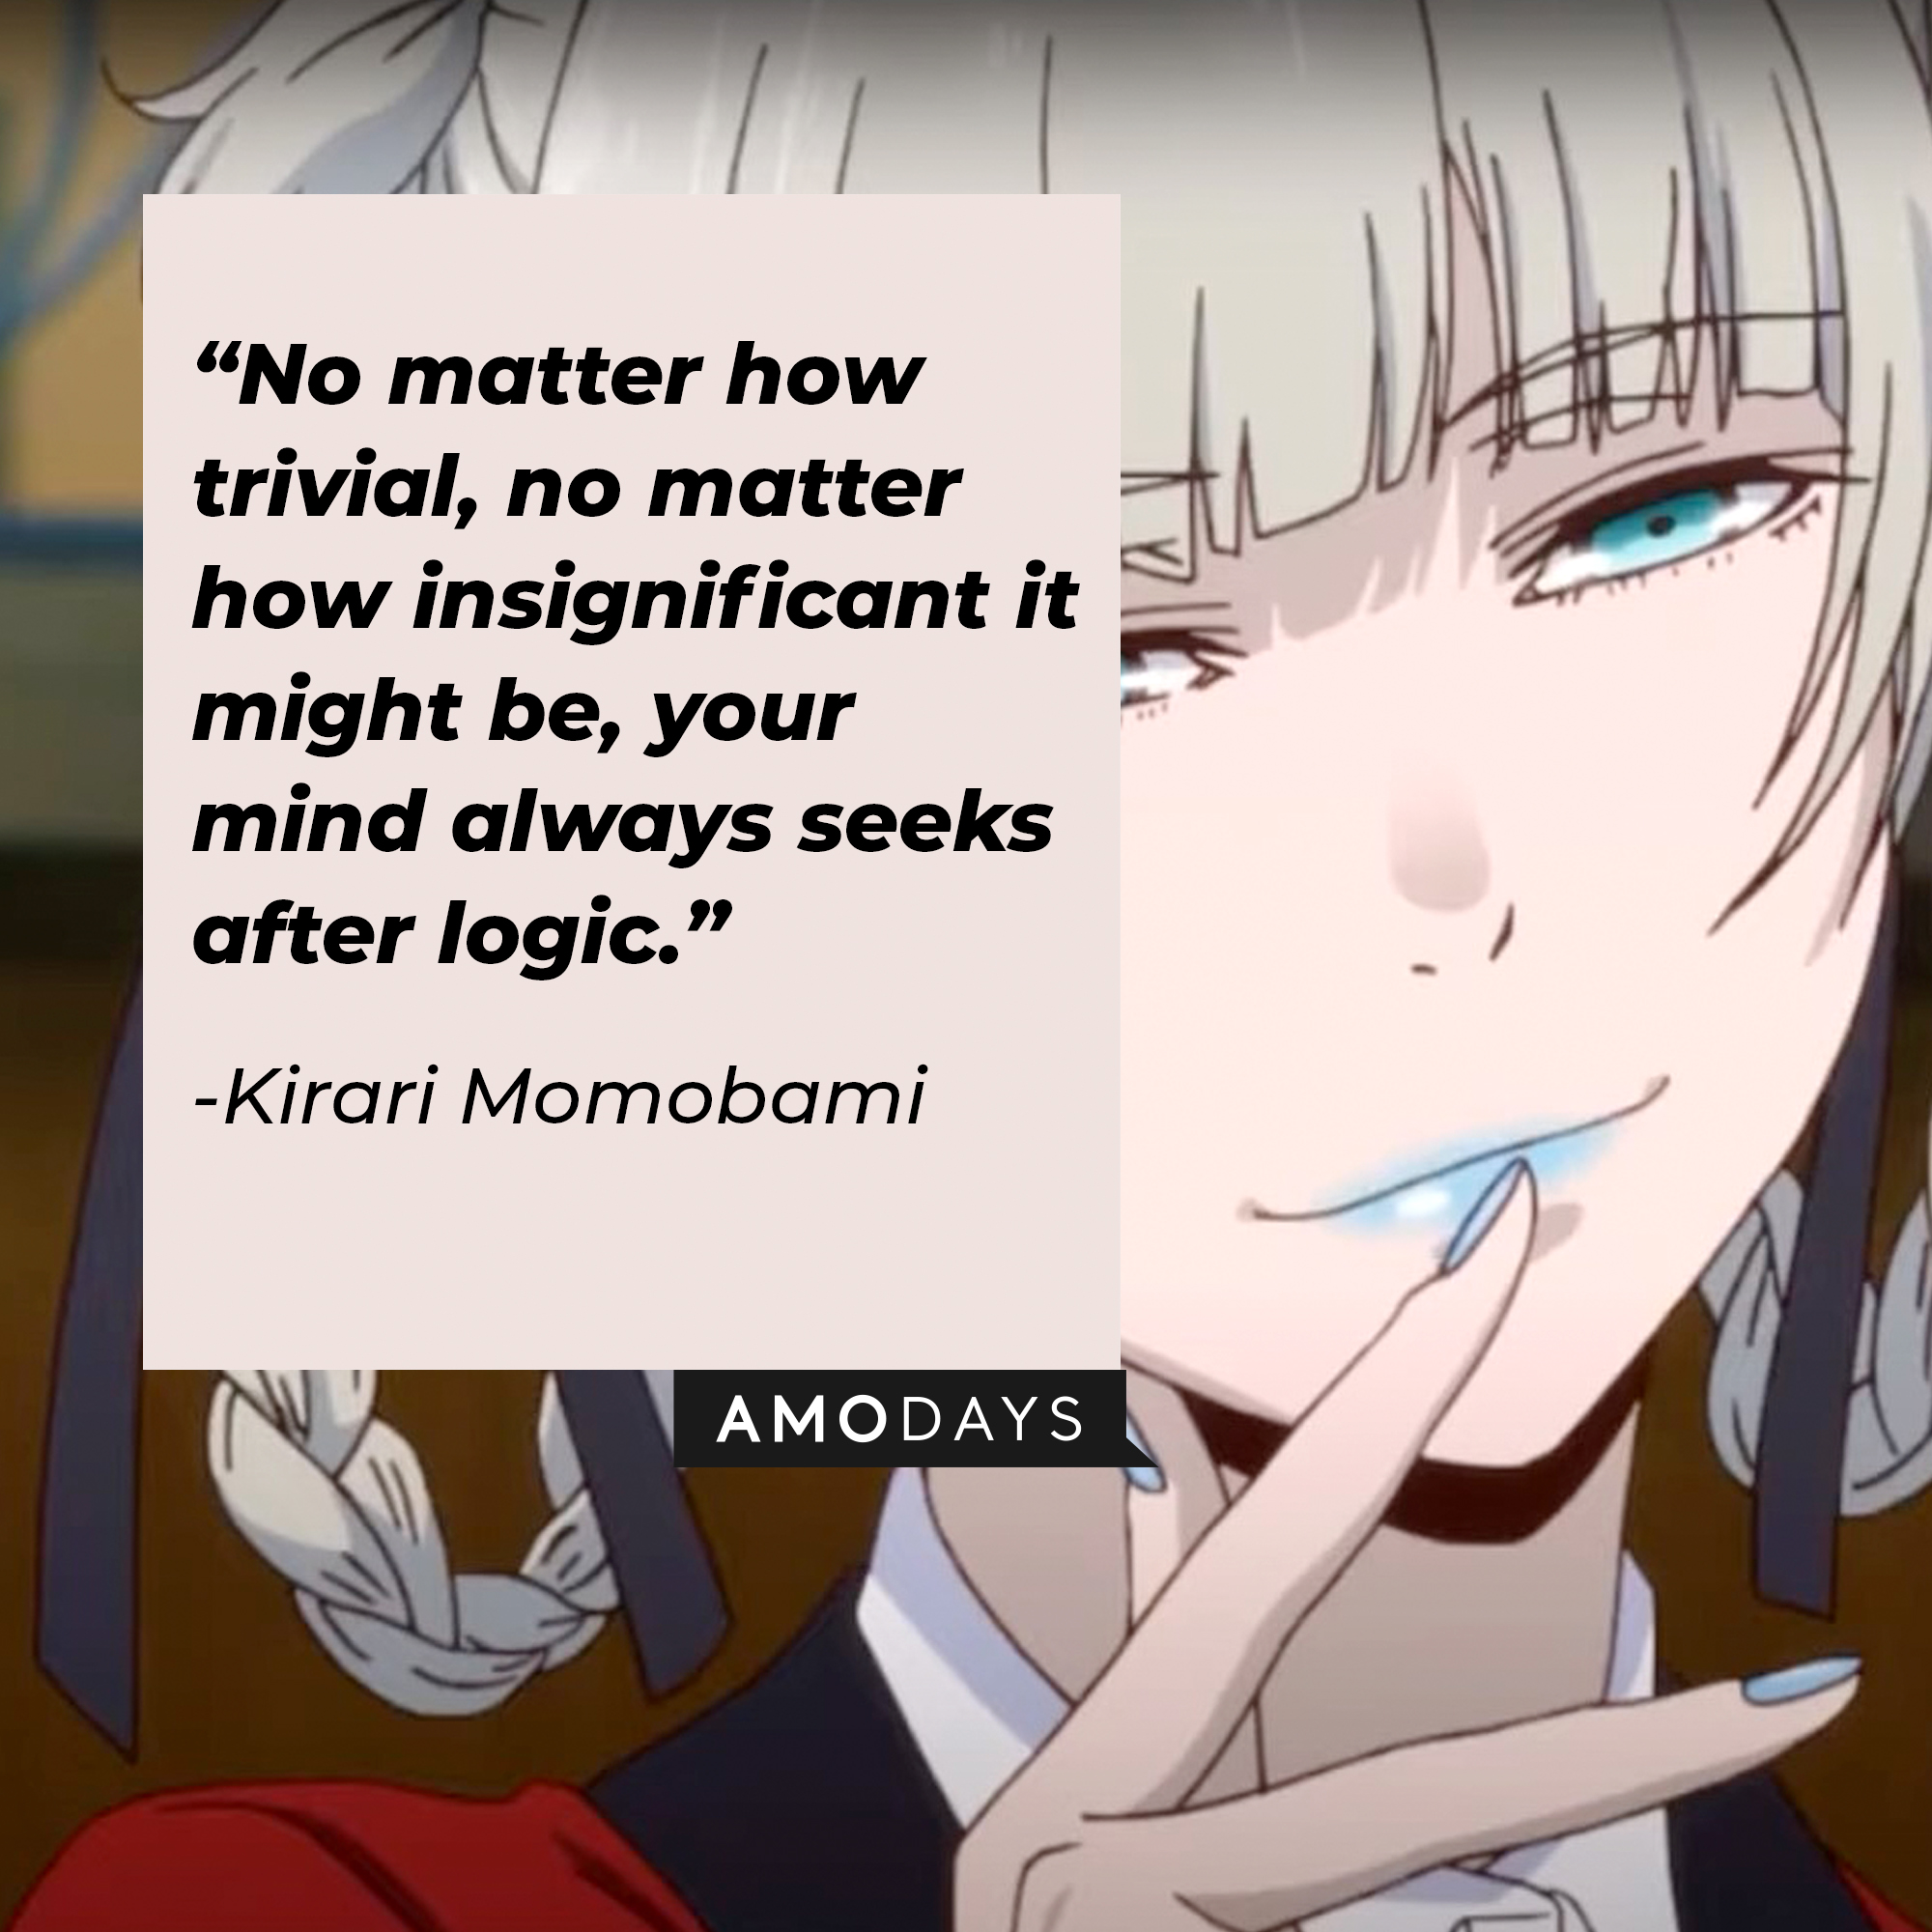 A picture of Kirari Momobami with her quote: “No matter how trivial, no matter how insignificant it might be, your mind always seeks after logic.” | Source: youtube.com/netflixanime